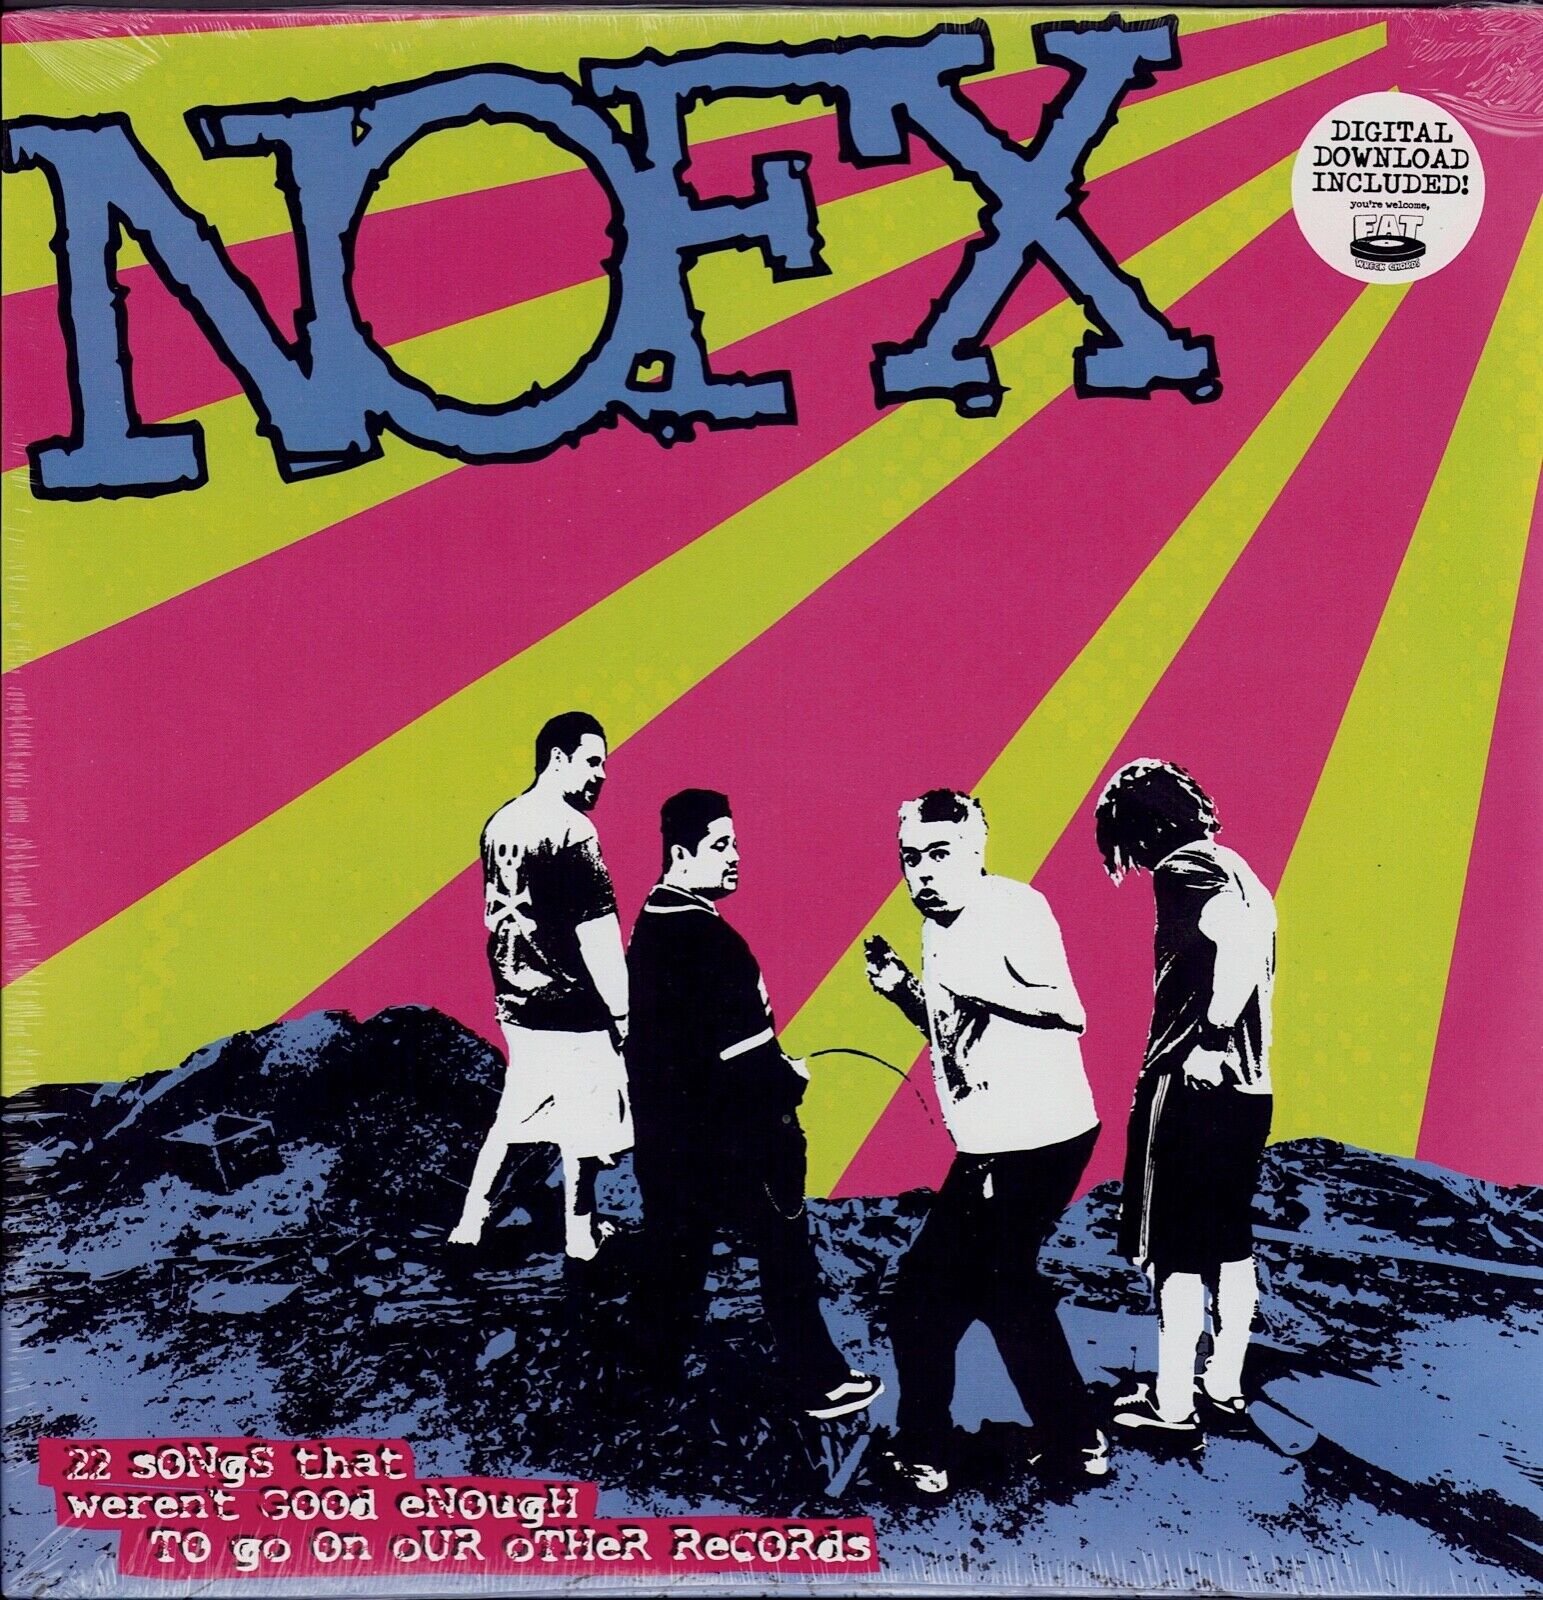 NOFX ‎- 22 Songs That Weren't Good Enough To Go On Our Other Records Vinyl LP